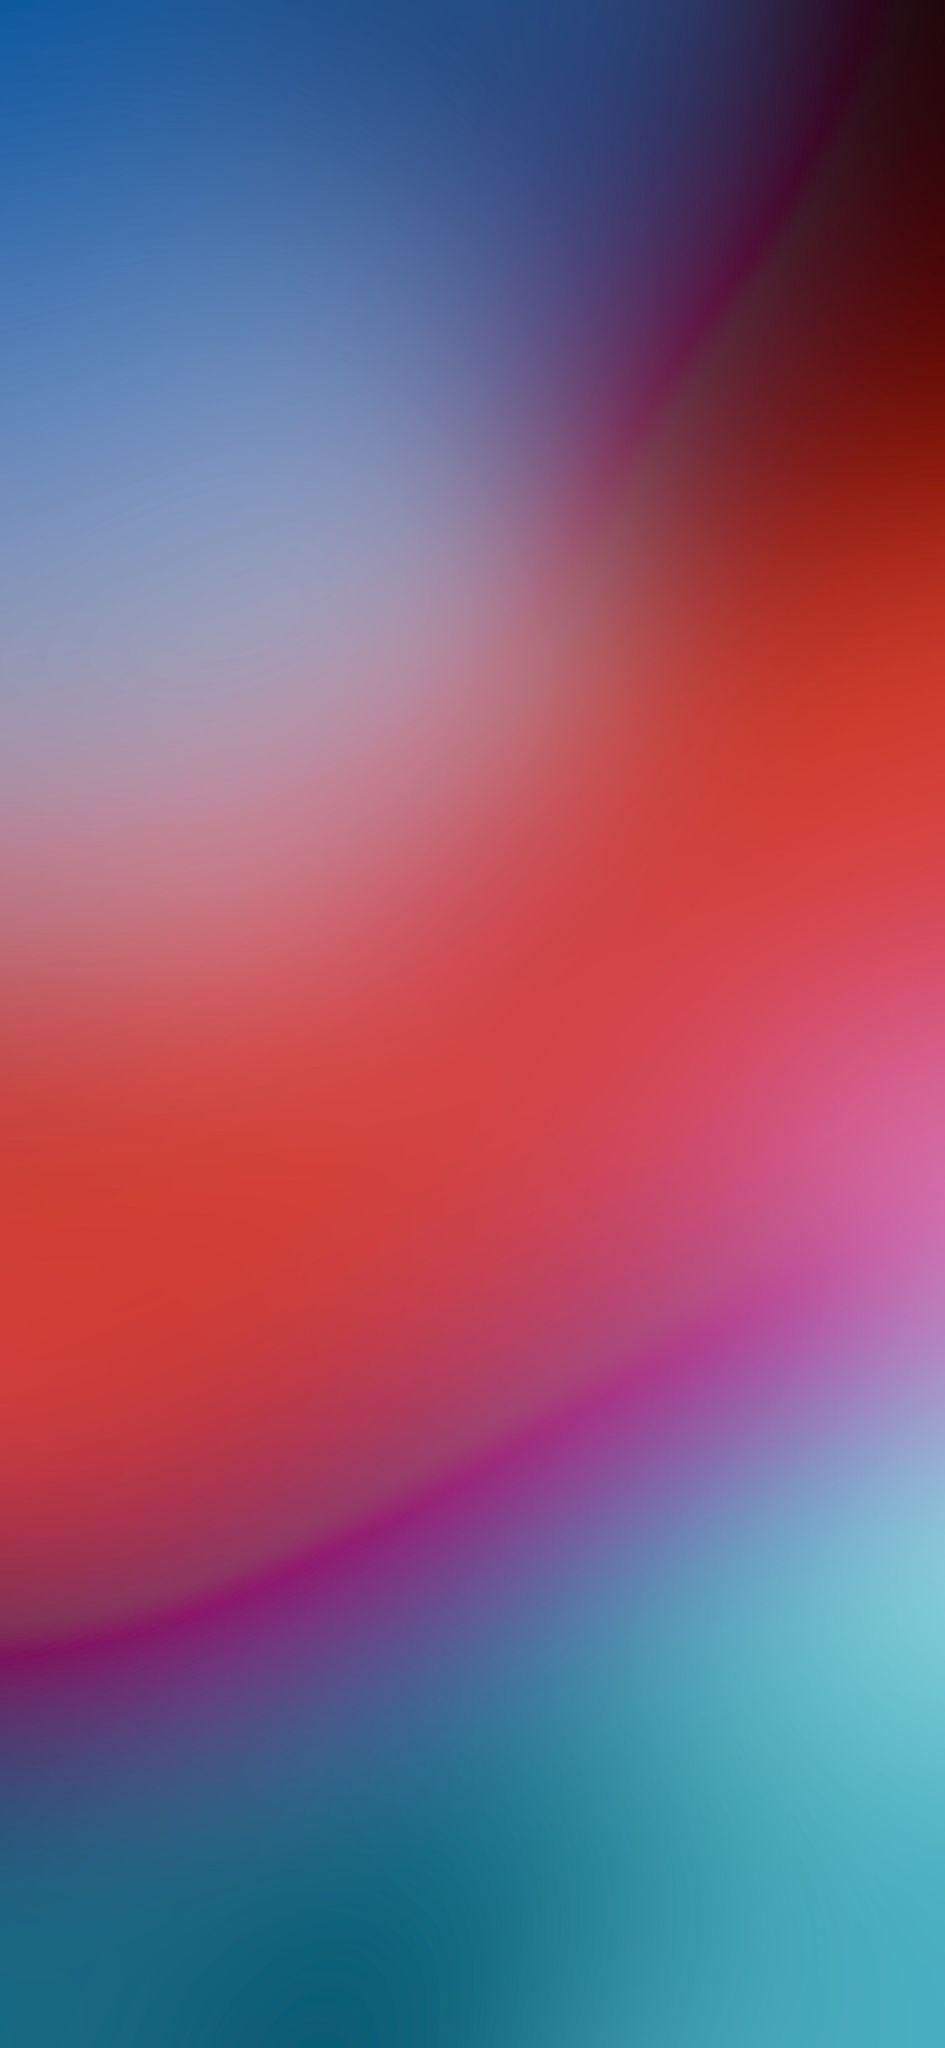 1440x25602021911 Artistic Gradient Blur 1440x25602021911 Resolution  Wallpaper HD Abstract 4K Wallpapers Images Photos and Background   Wallpapers Den